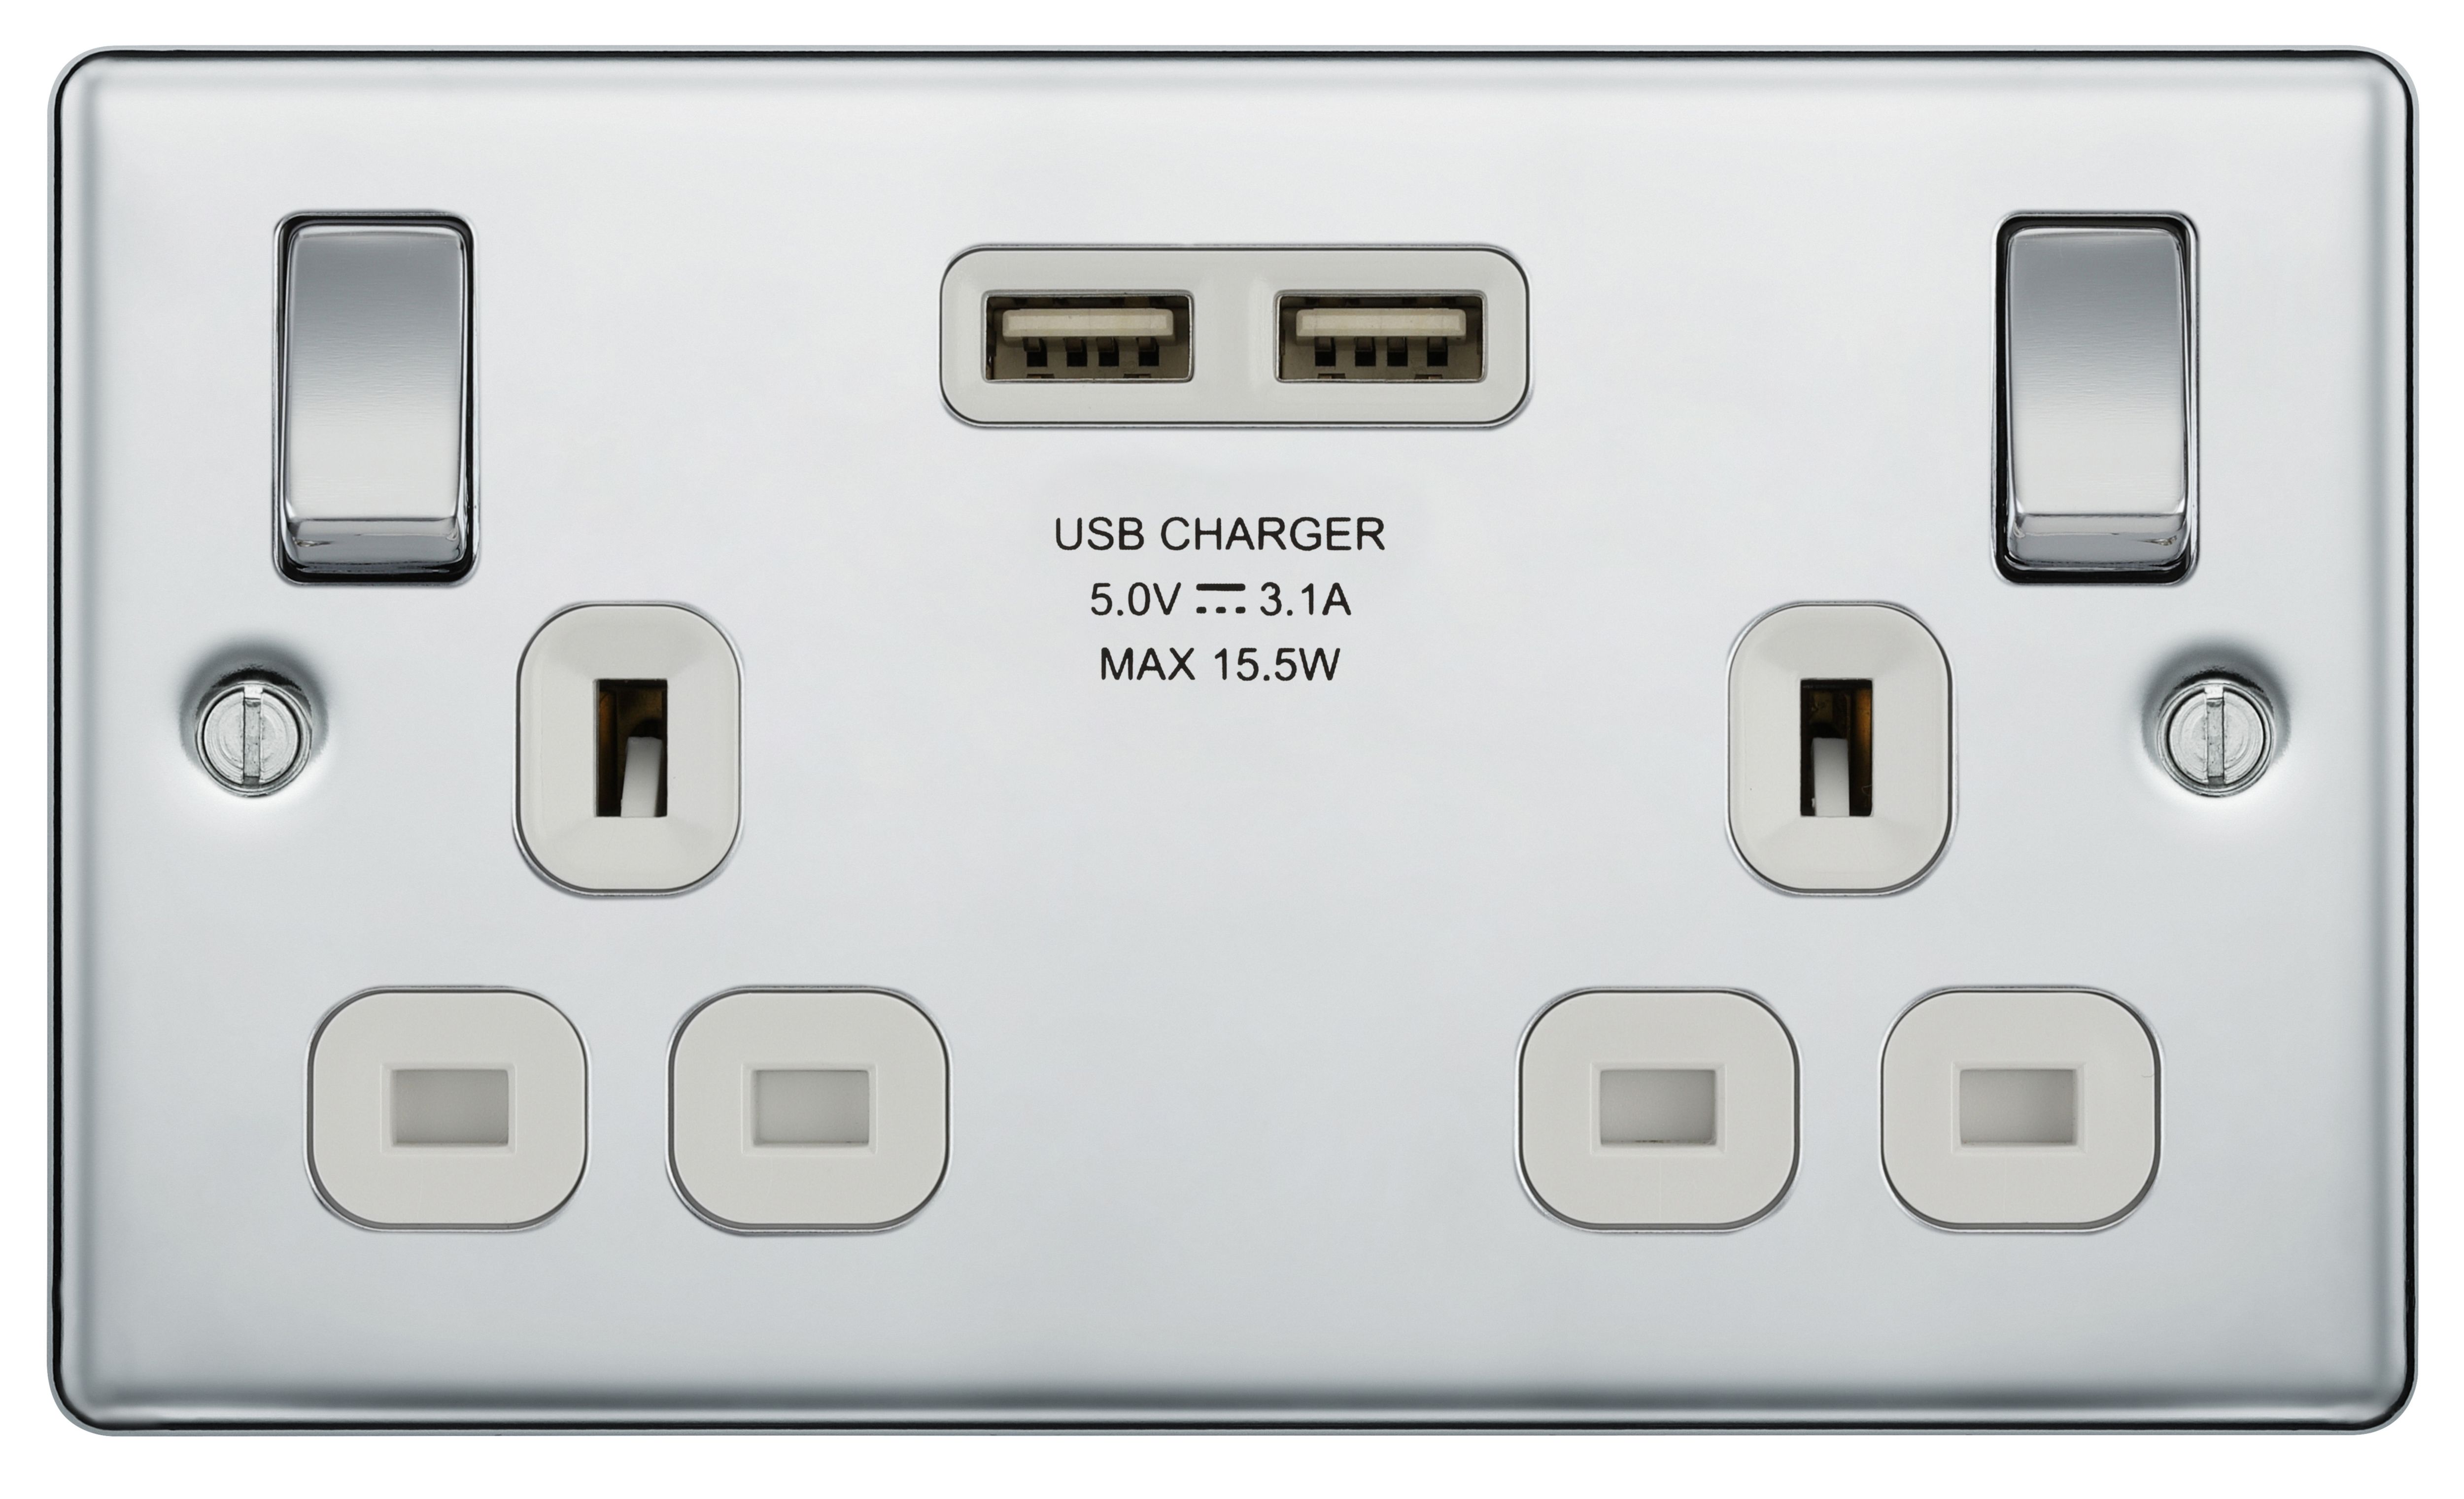 BG 13A Screwed Raised Plate Double Switched Power Socket + 2X Usb Sockets 2.1A - Polished Chrome